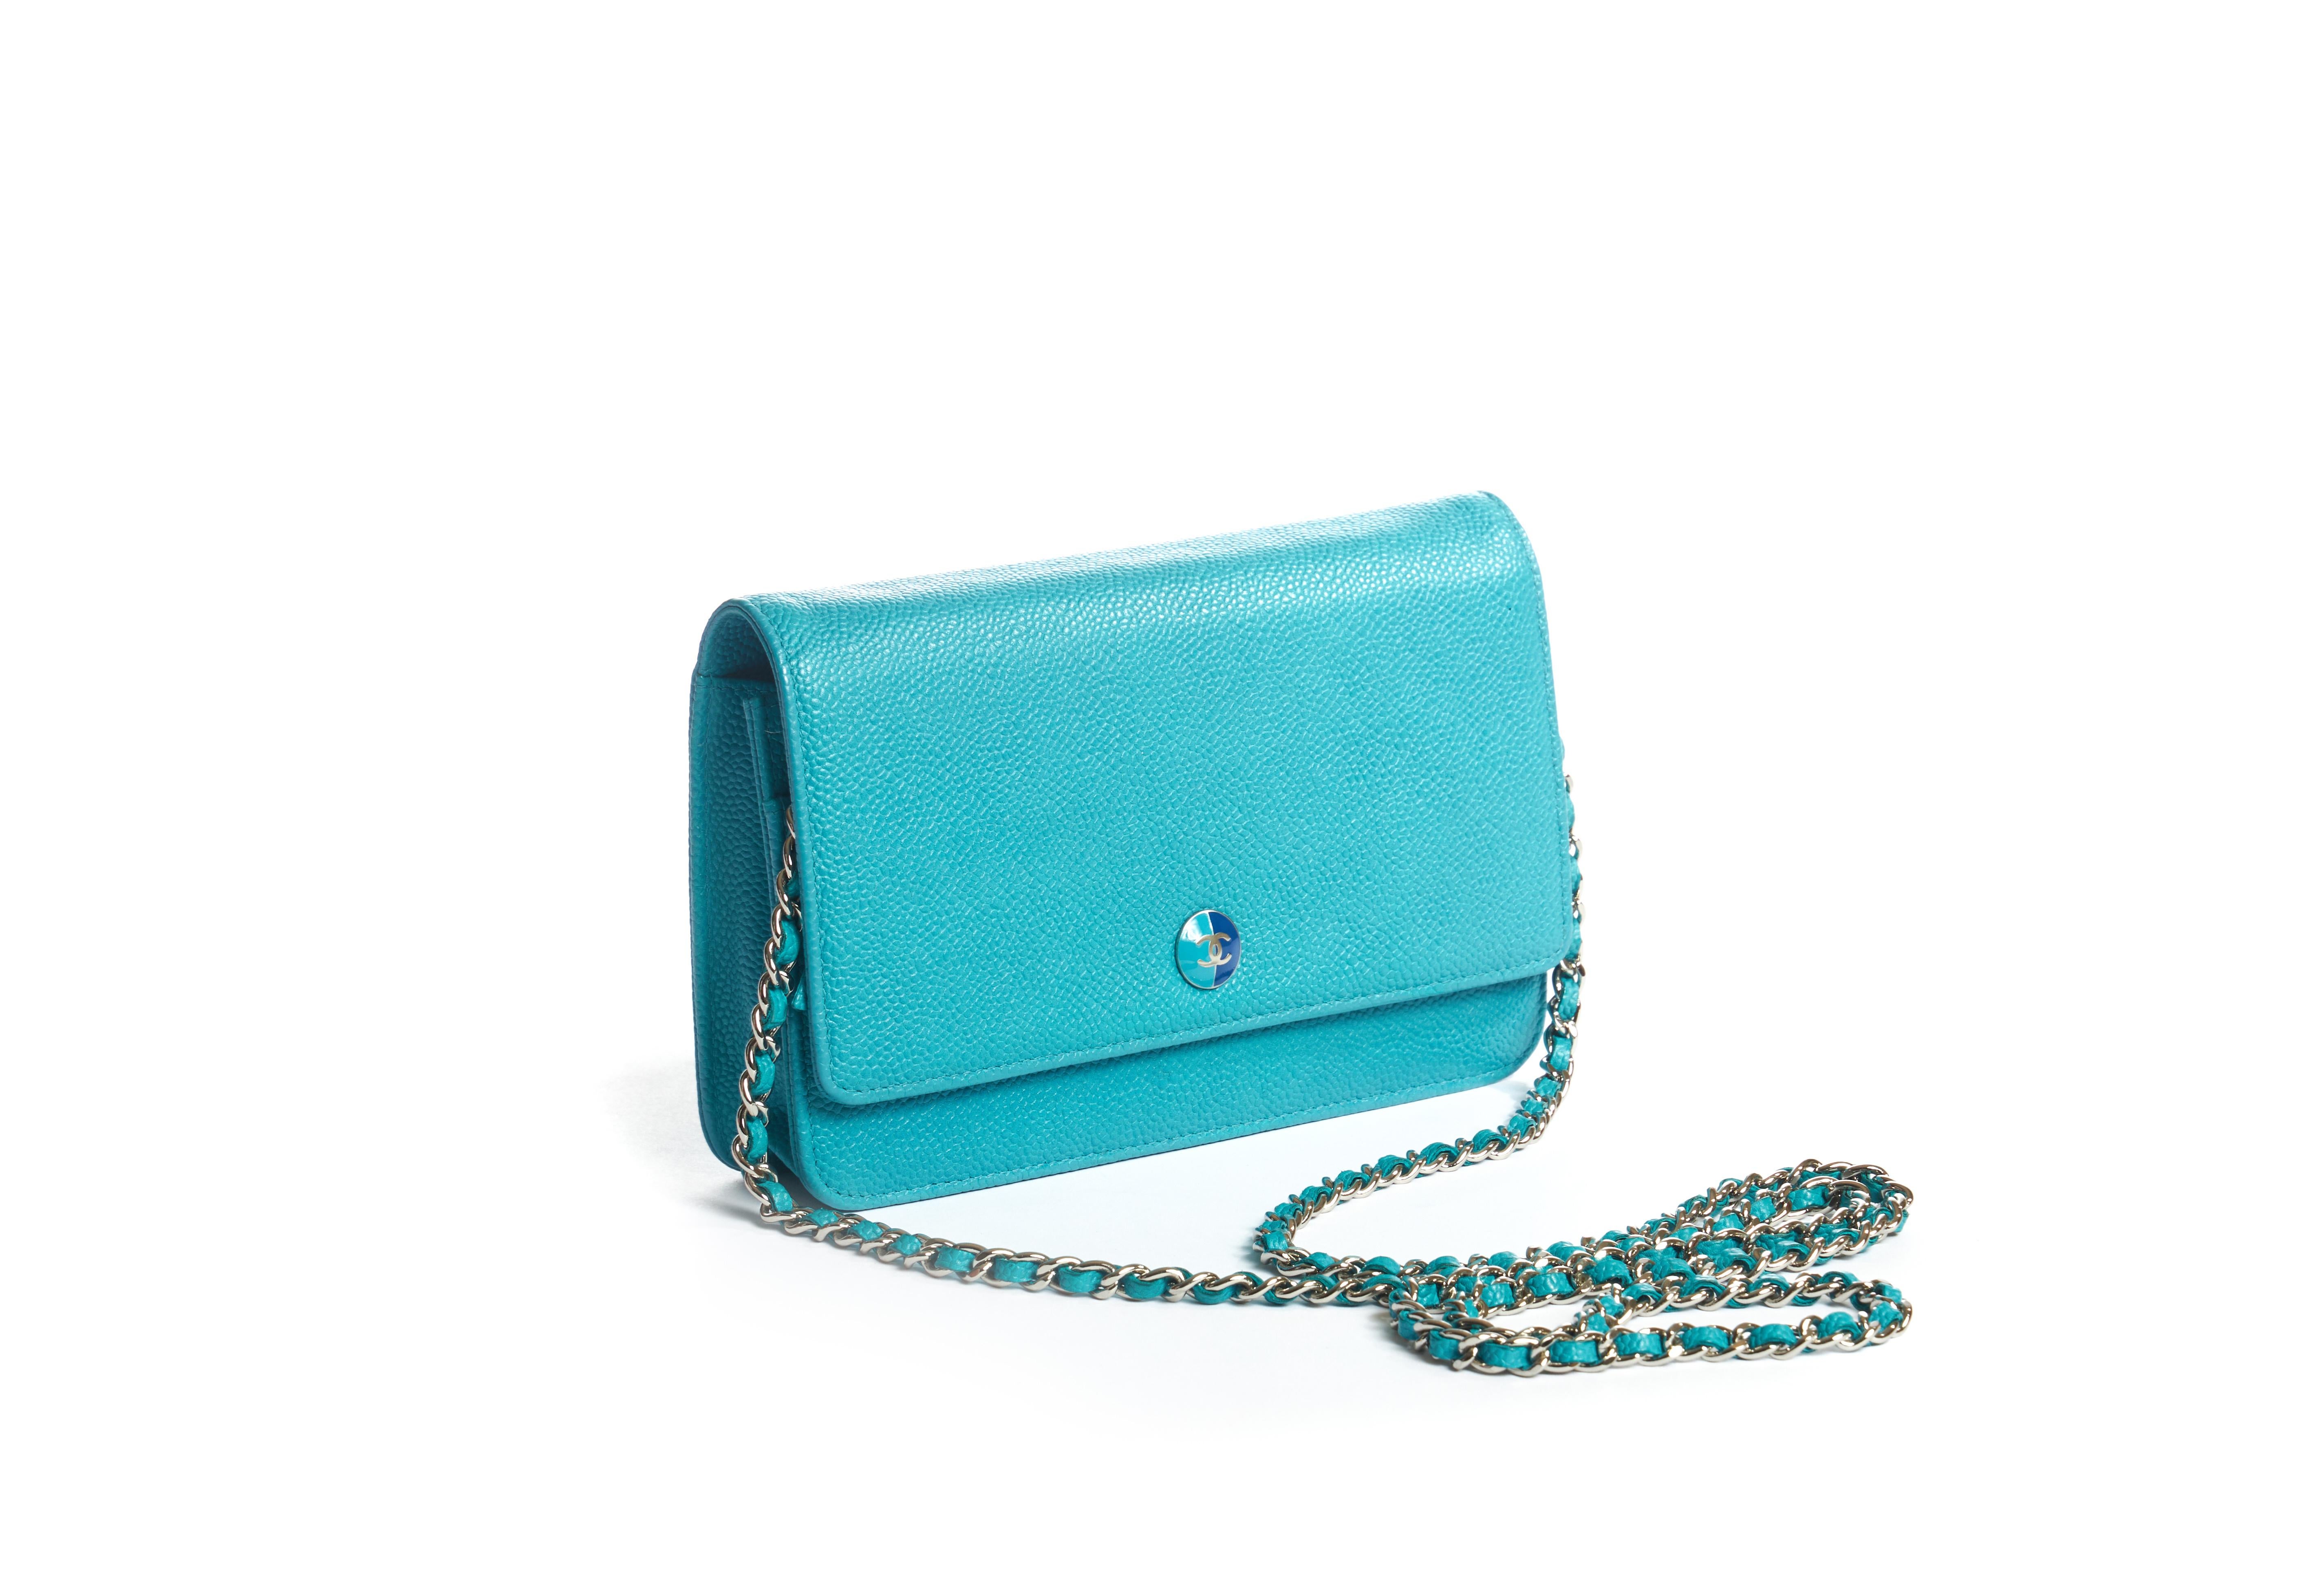 Chanel excellent condition two tone cross body bag. Turquoise caviar leather with electric blue interior. Shoulder drop 25